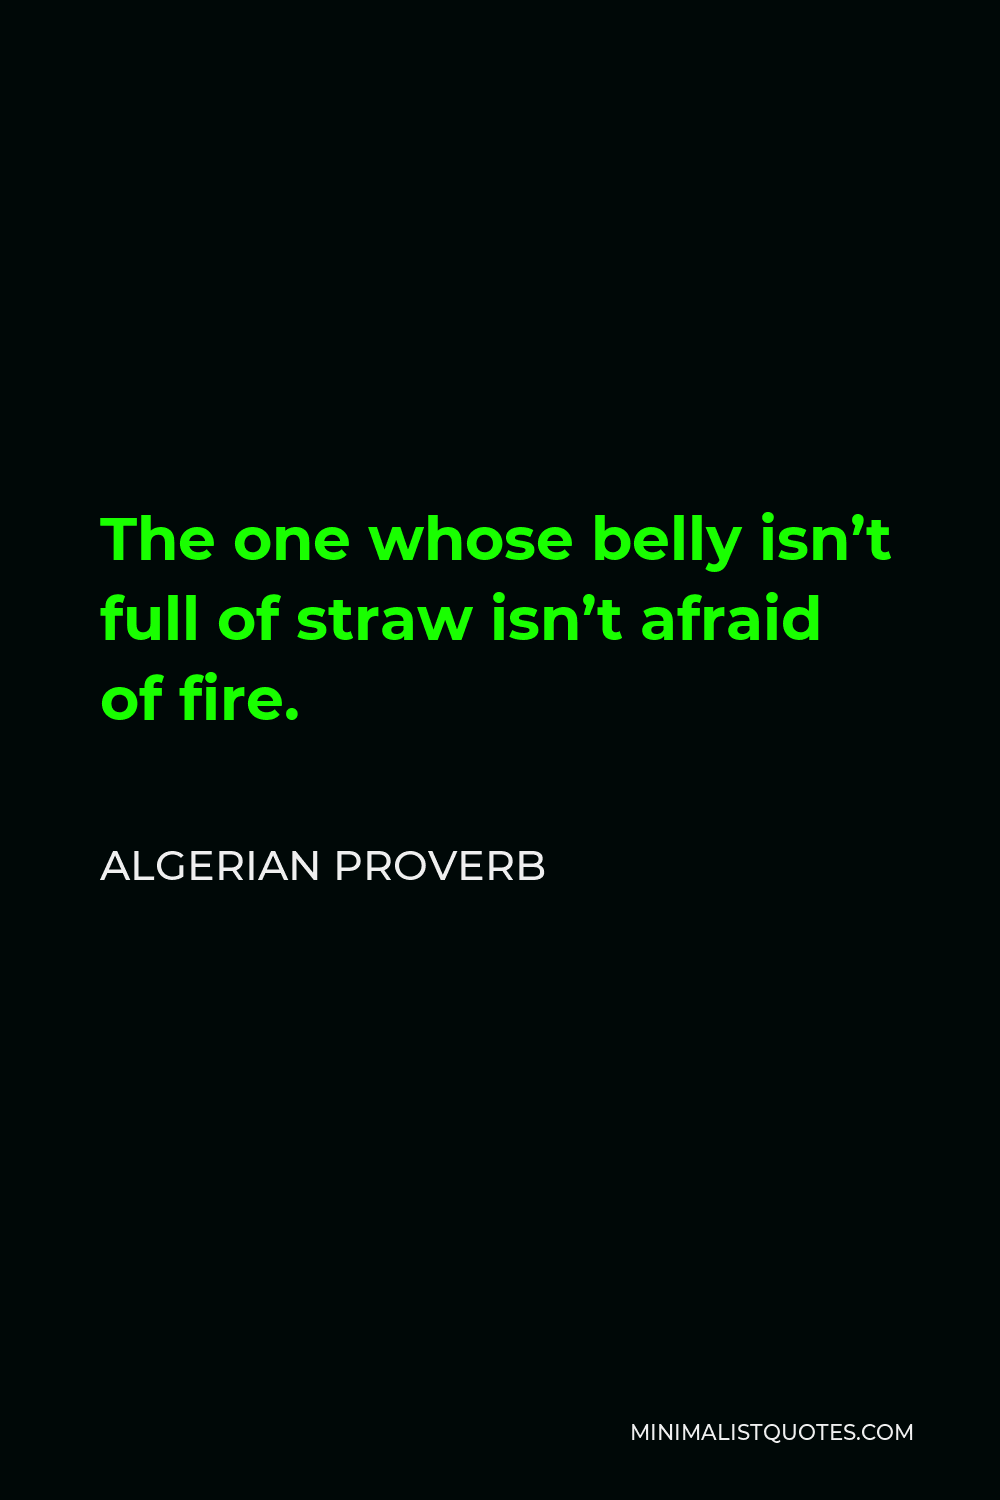 Algerian Proverb Quote - The one whose belly isn’t full of straw isn’t afraid of fire.